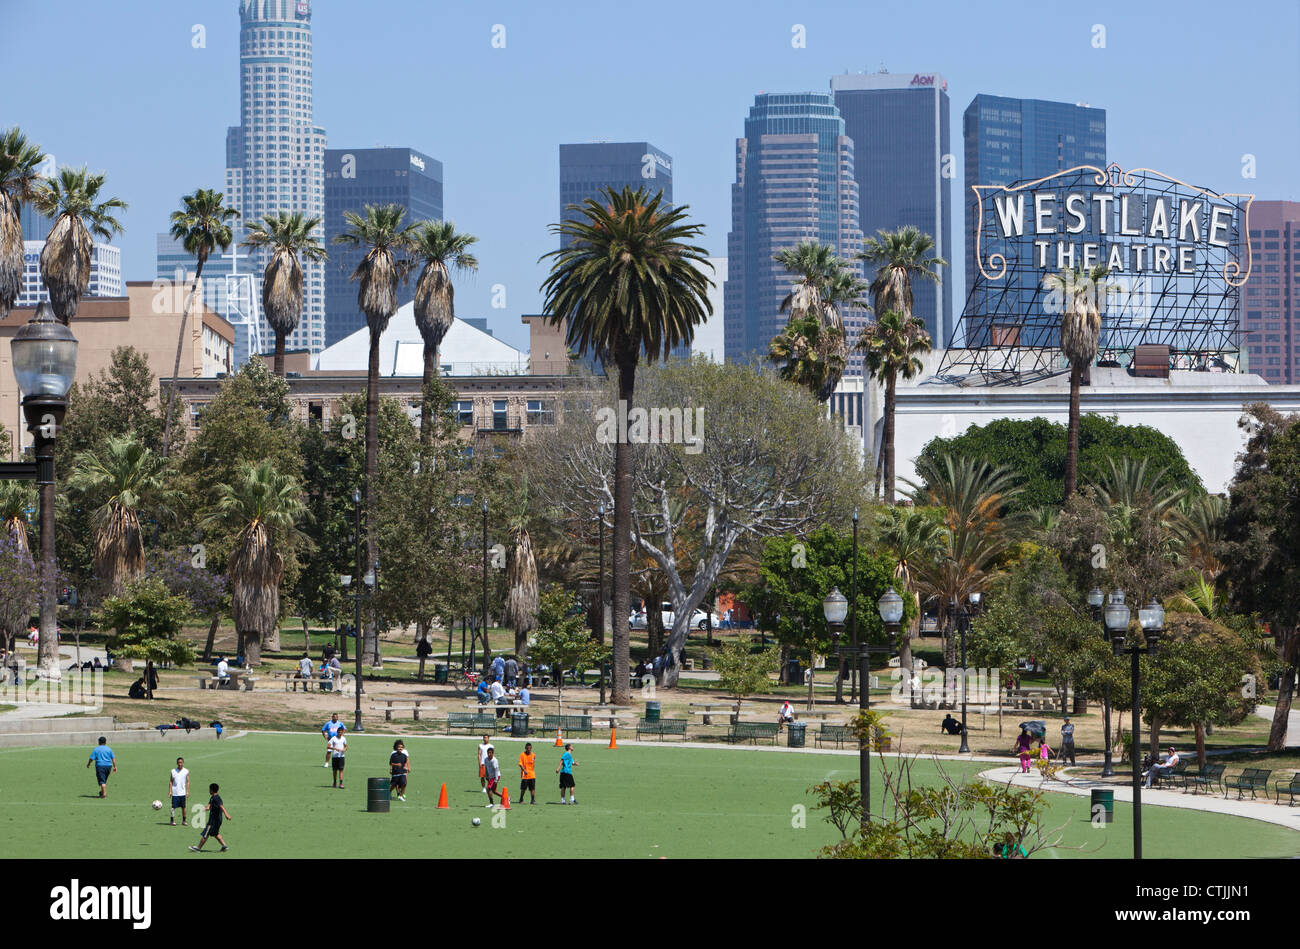 Los Angeles, California - A soccer game in MacArthur Park, with downtown Los Angeles in the background. Stock Photo